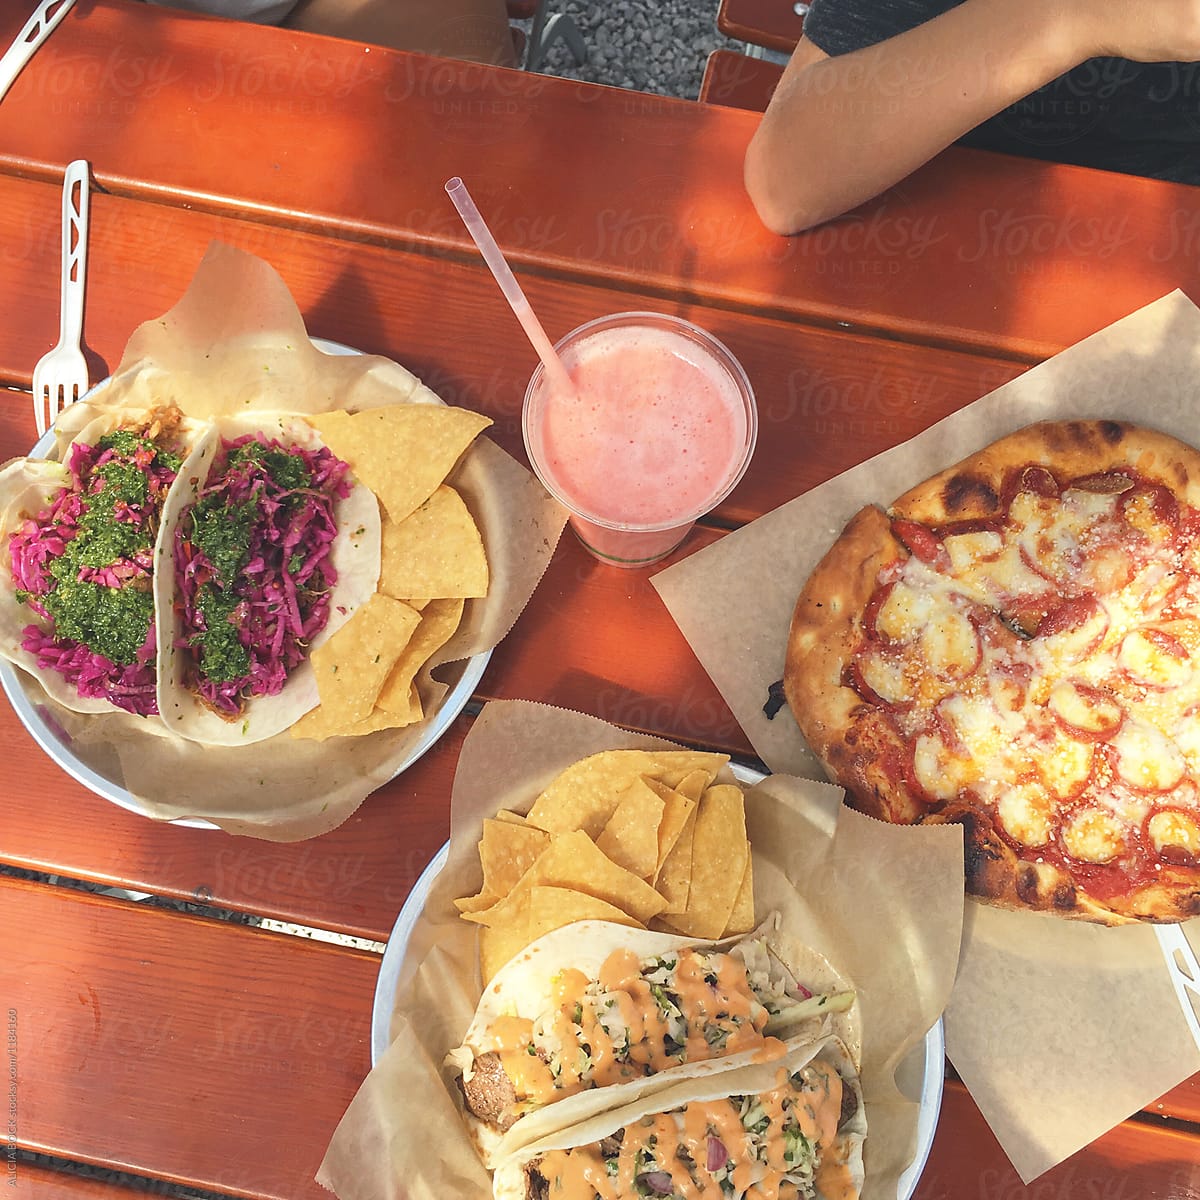 An Assortment of Tacos And Pizza From Food Trucks